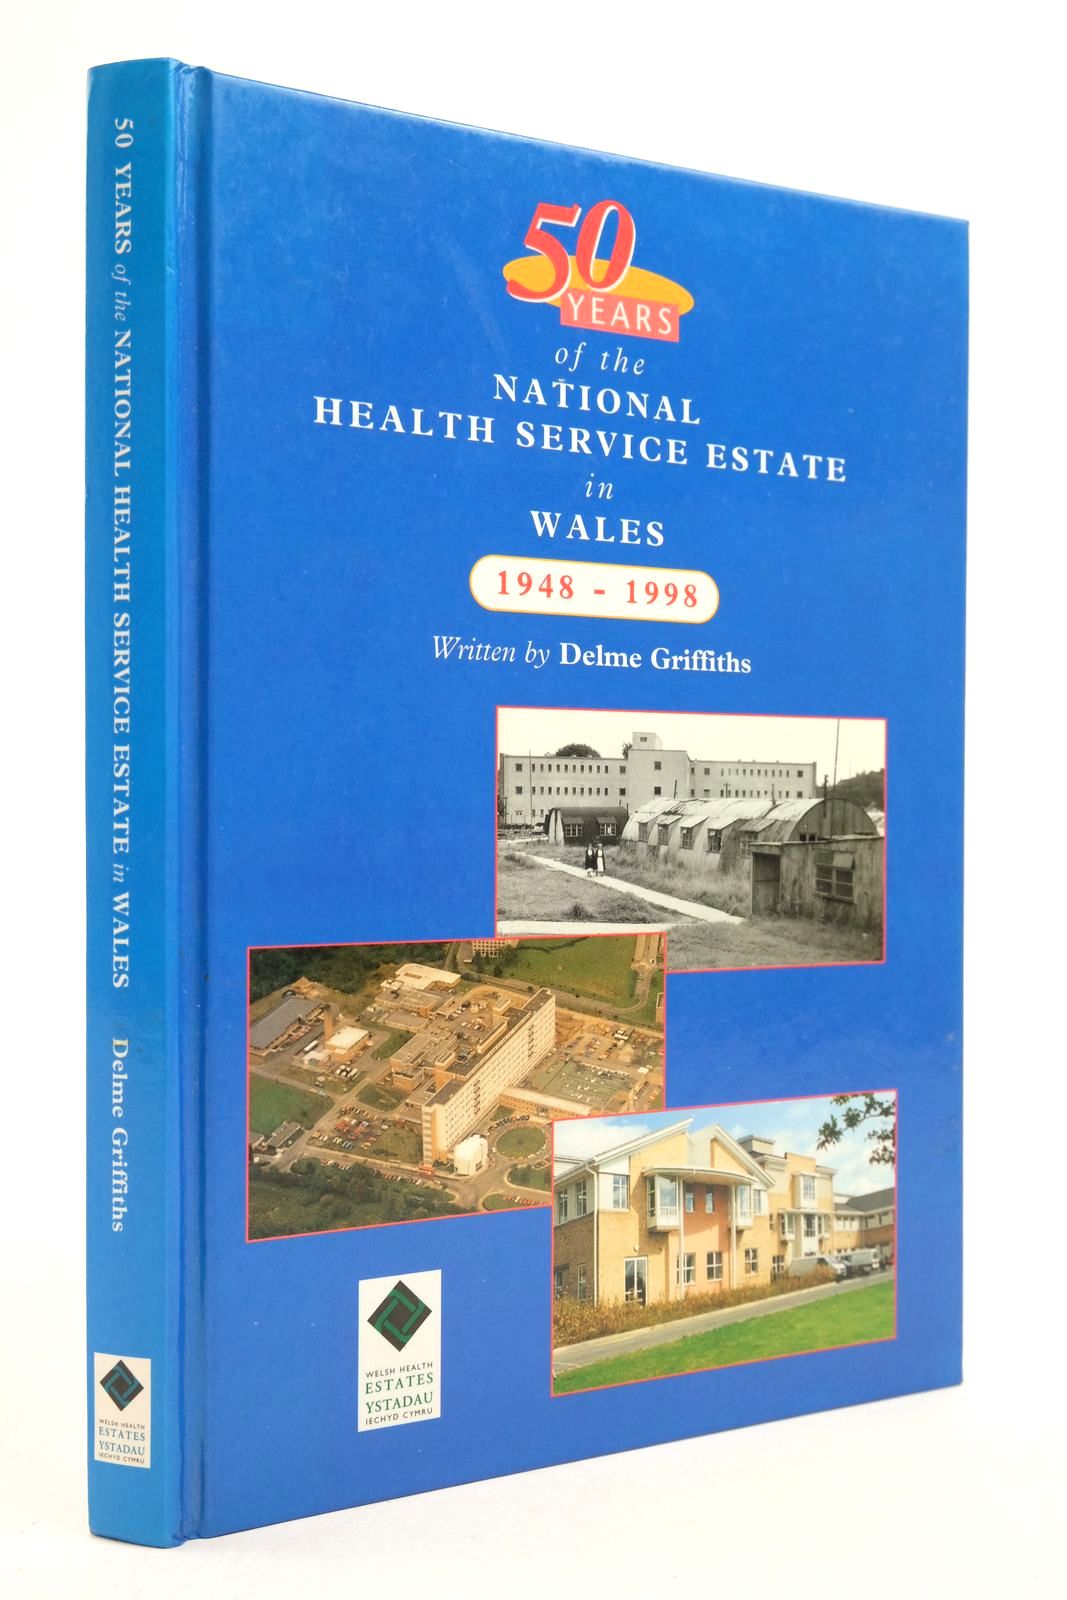 Photo of 50 YEARS OF THE NATIONAL HEALTH SERVICE ESTATE IN WALES 1948 - 1998- Stock Number: 2139999